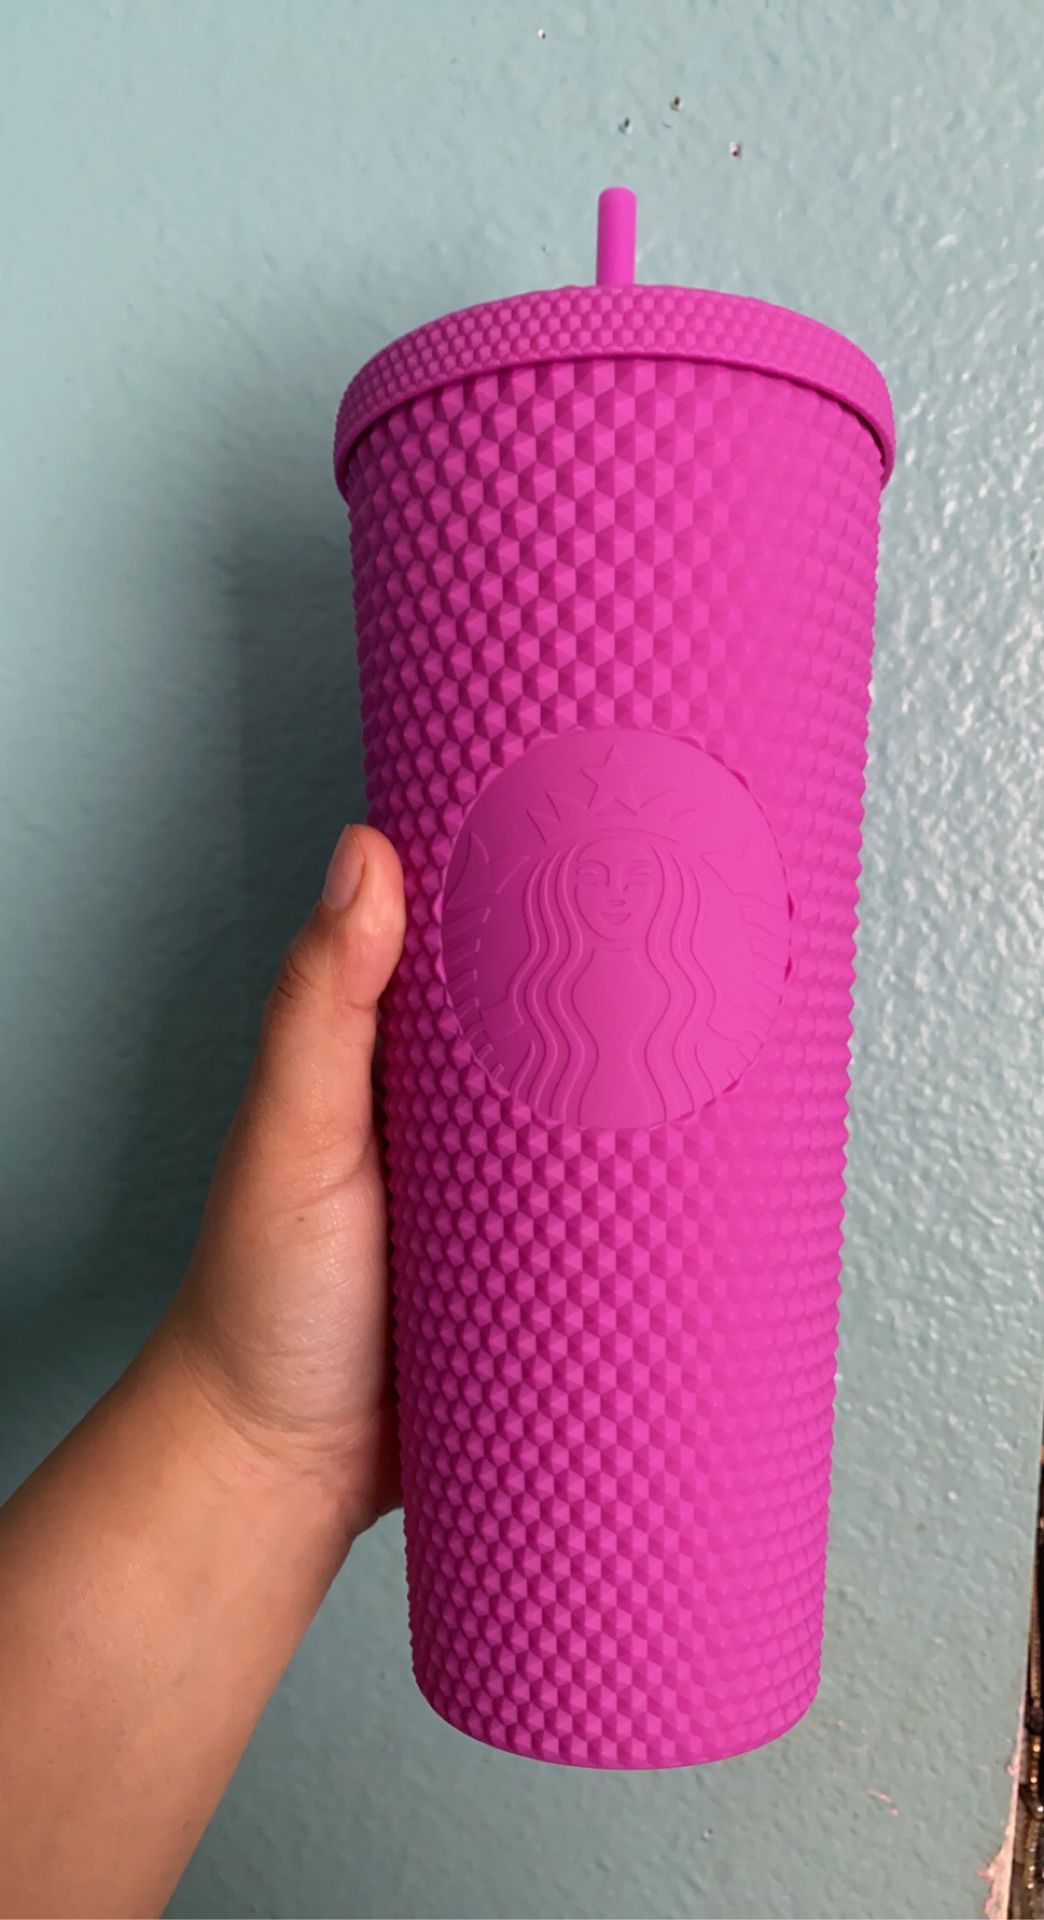 Gold Studded Starbucks Tumbler for Sale in Chino, CA - OfferUp